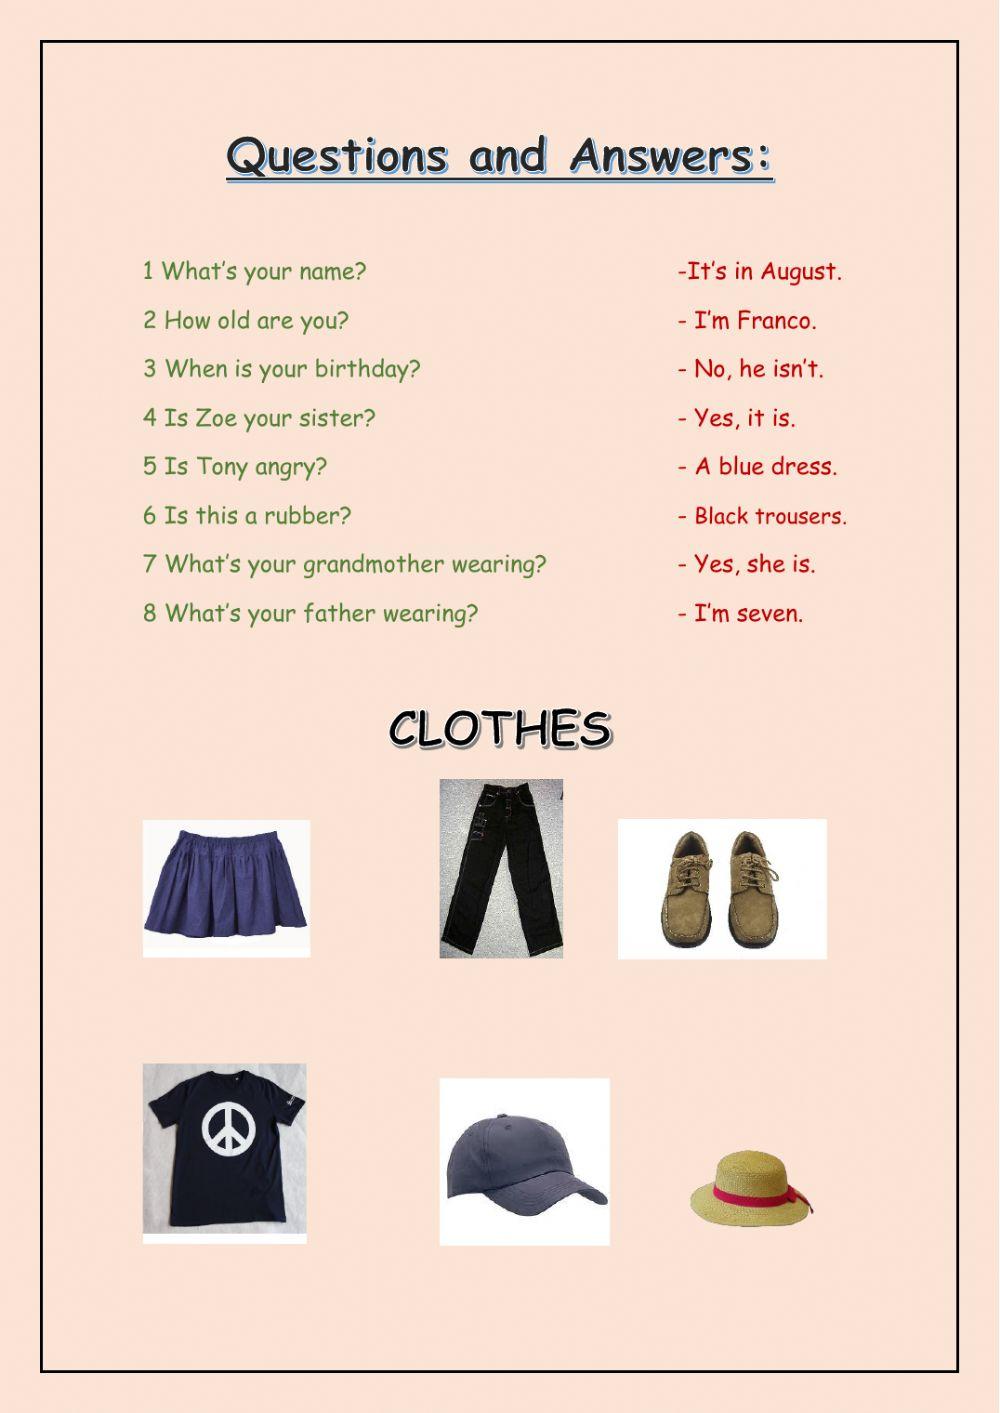 Questions and clothes